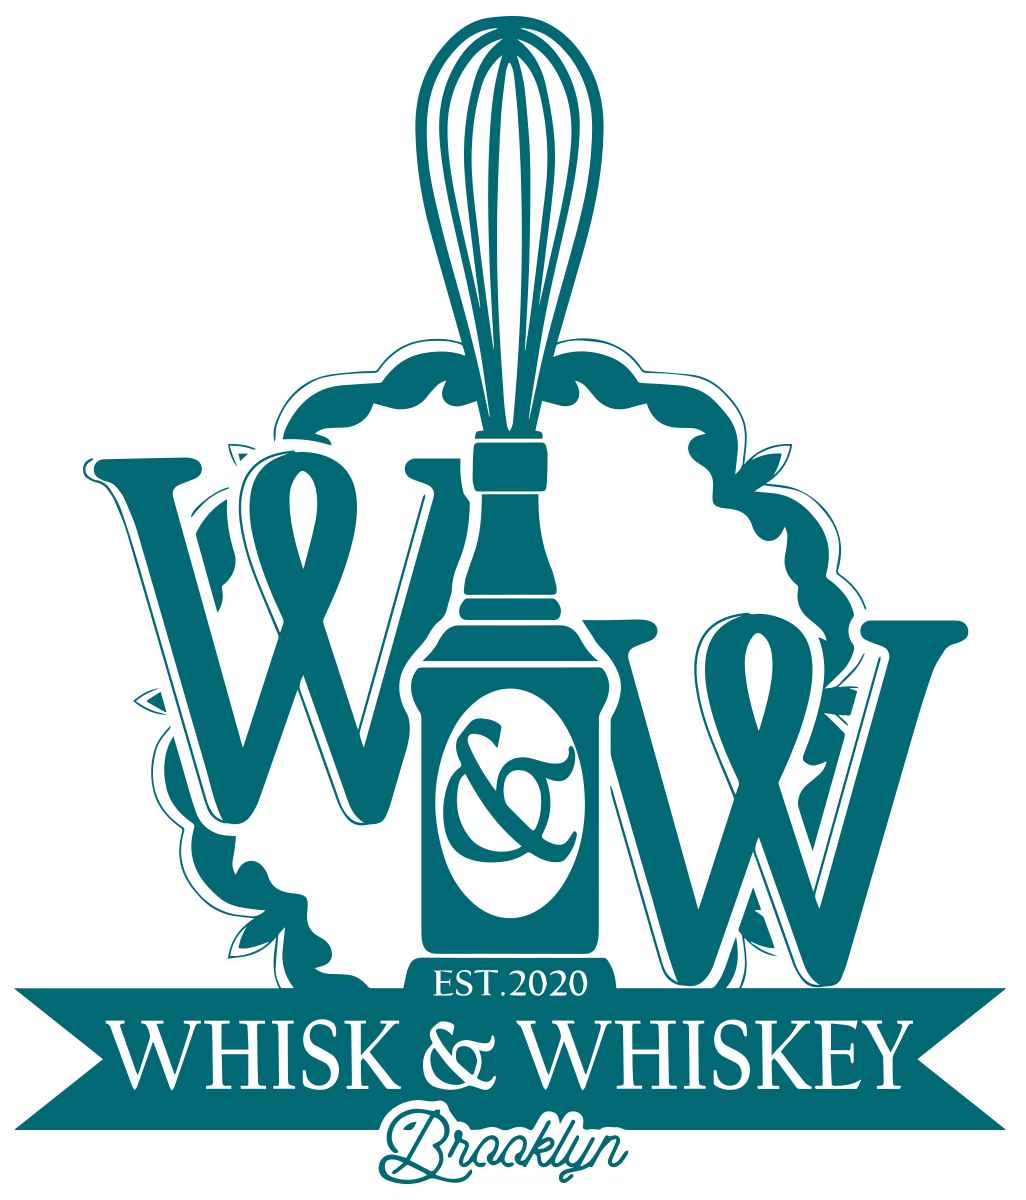 Whisk and Whiskey Brooklyn